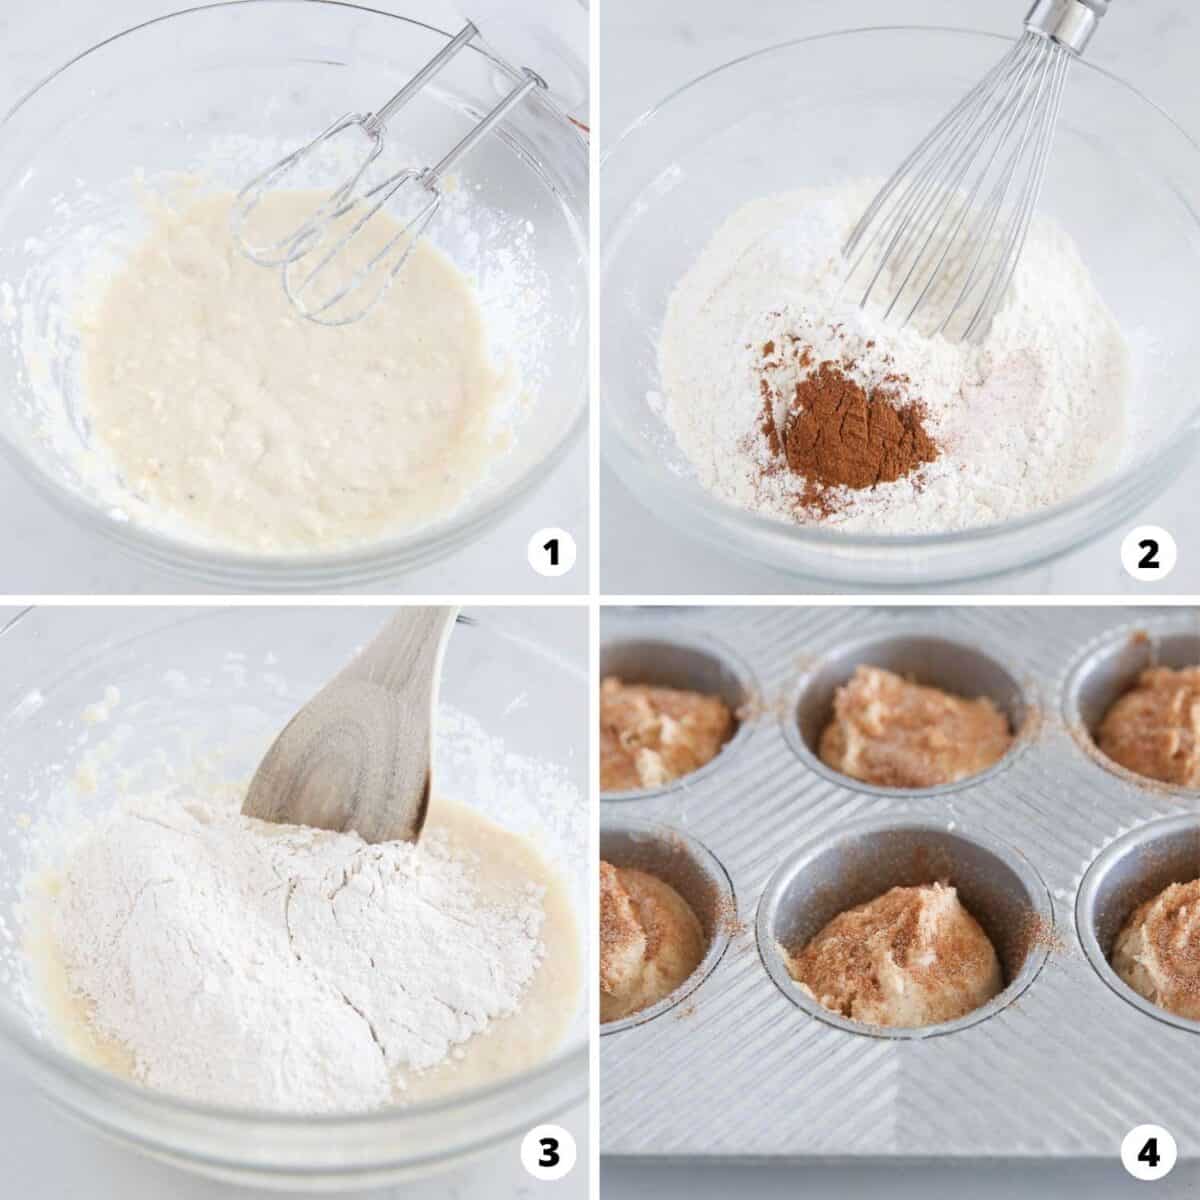 Showing how to make snickerdoodle muffins.